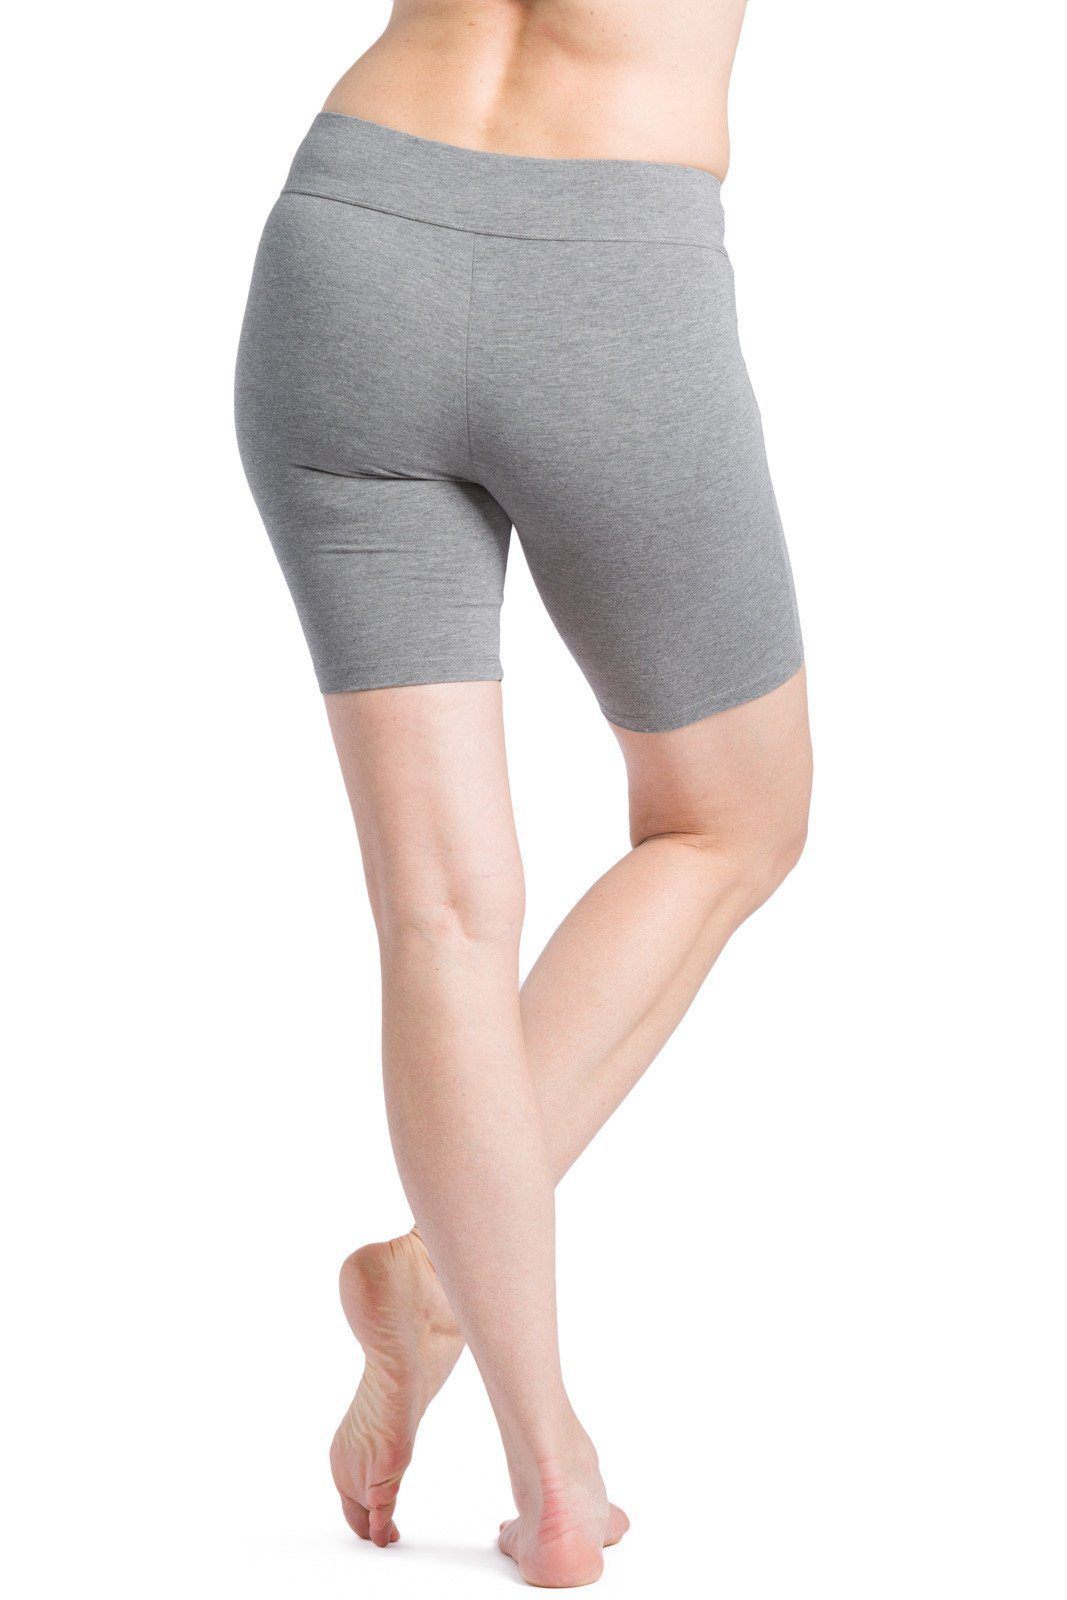 women's mid thigh athletic shorts